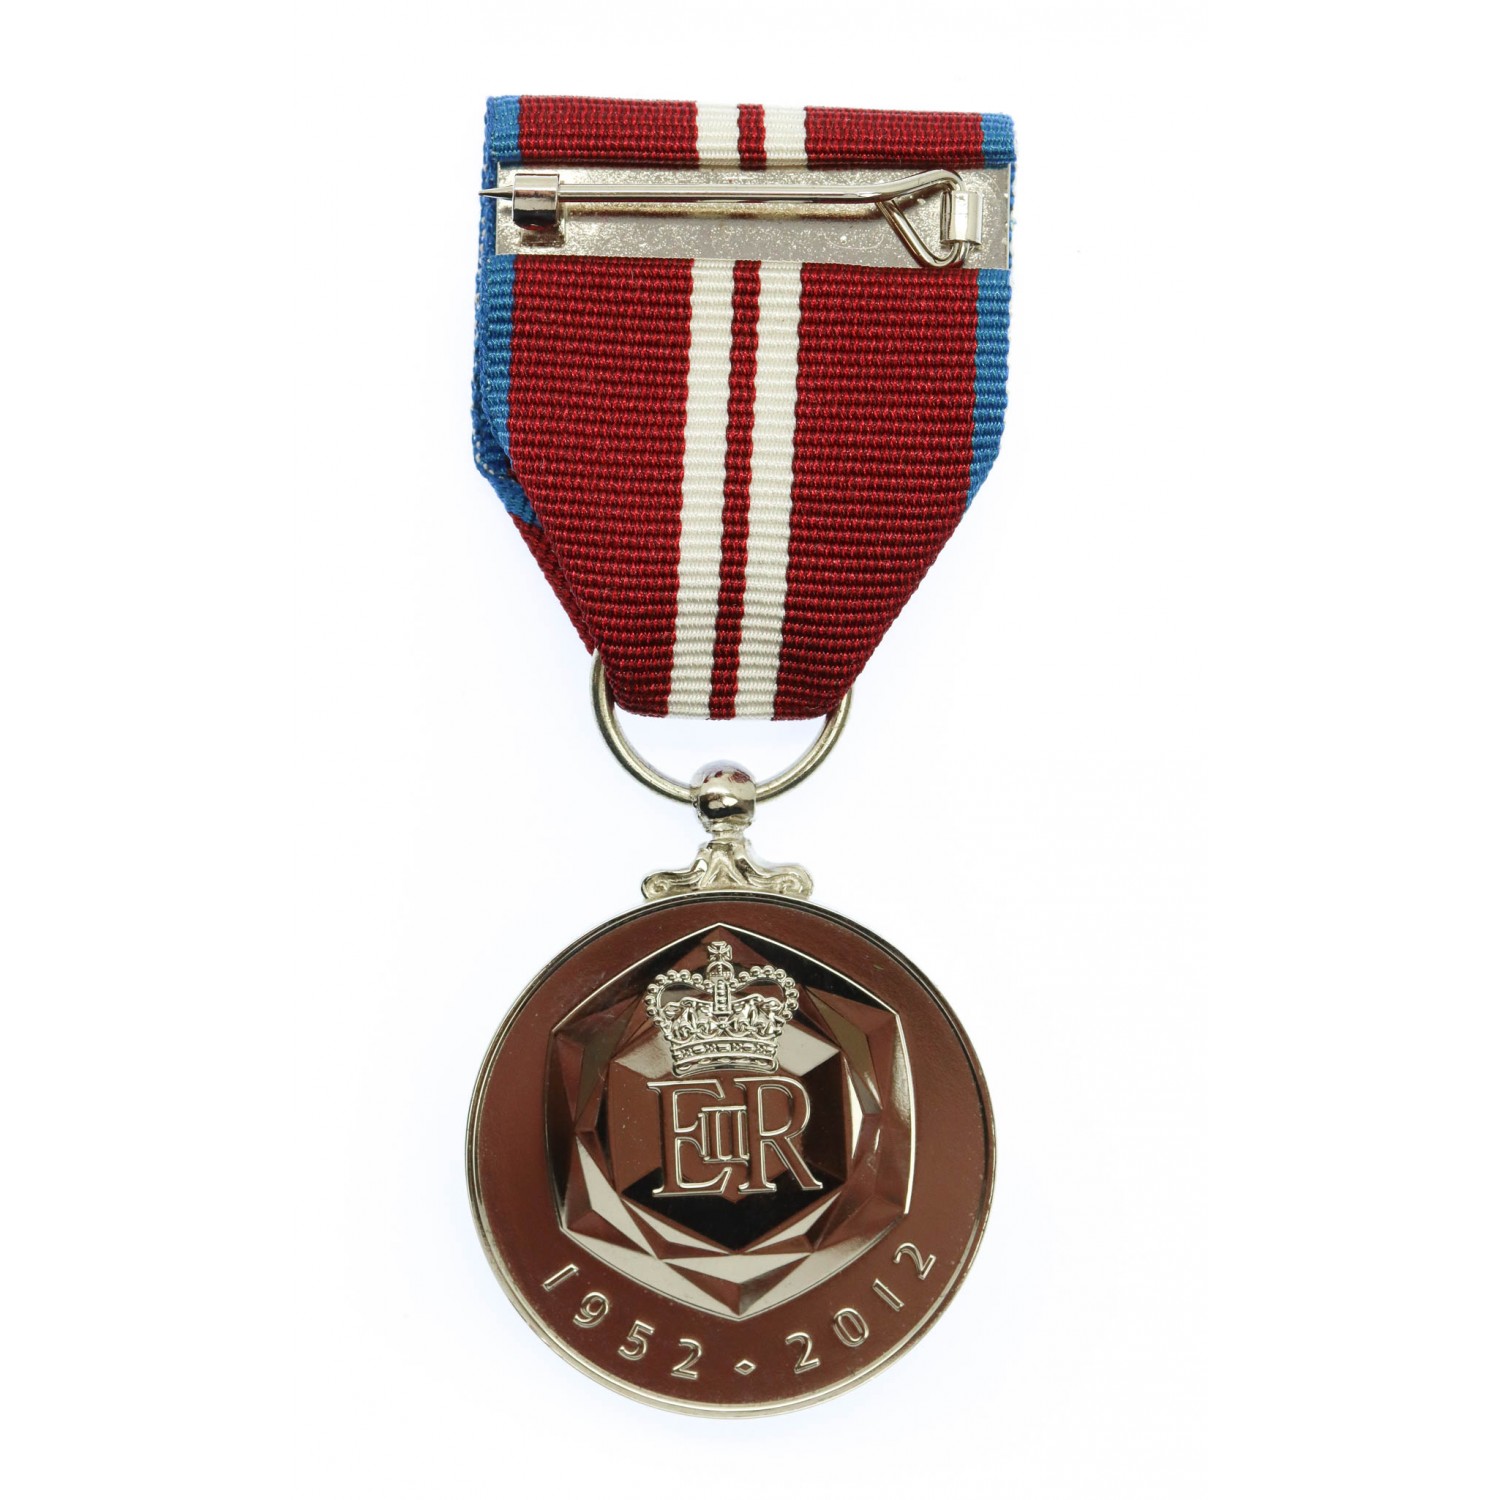 Queen's Diamond Jubilee Medal Full Size 1952-2012 as issued with box 